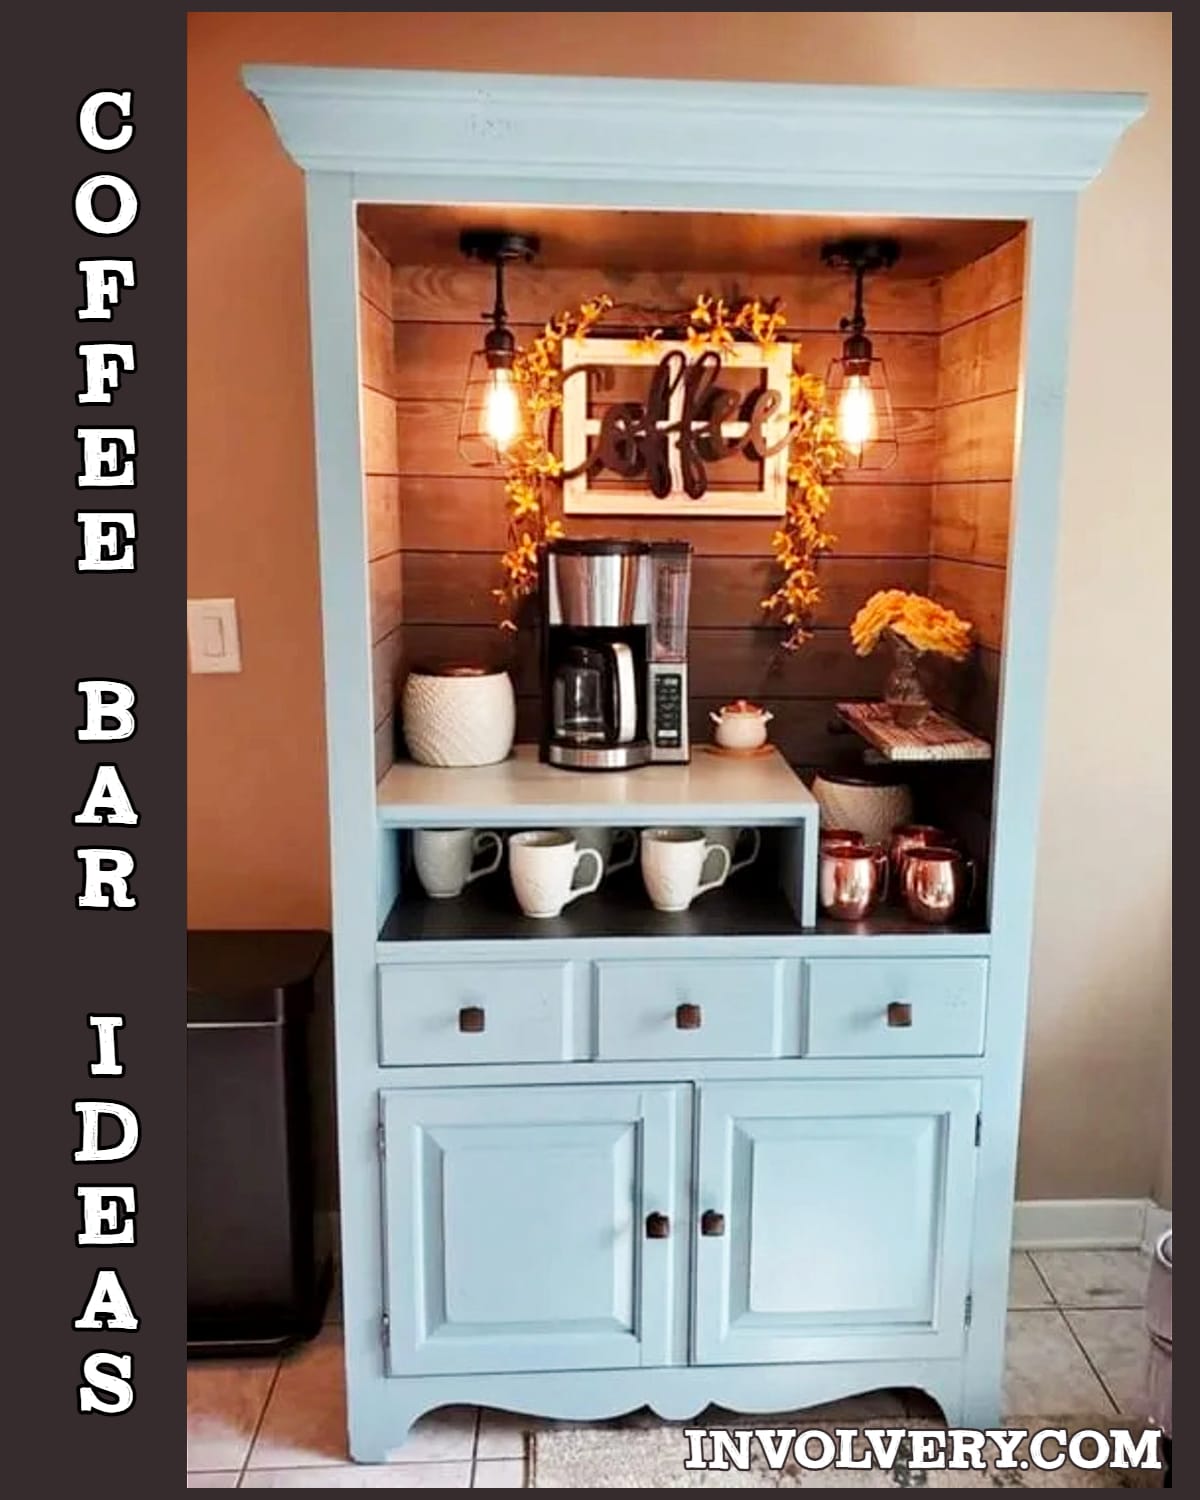 Upcycled Armoire Into a Coffee Bar  - Unique way to make a coffee bar for home - turn an old tall dresser, armoire or hutch into a repurposed / refurbished coffee bar for your kitchen or dining room - Gorgeous vintage rustic farmhouse look from an old chest cabinet